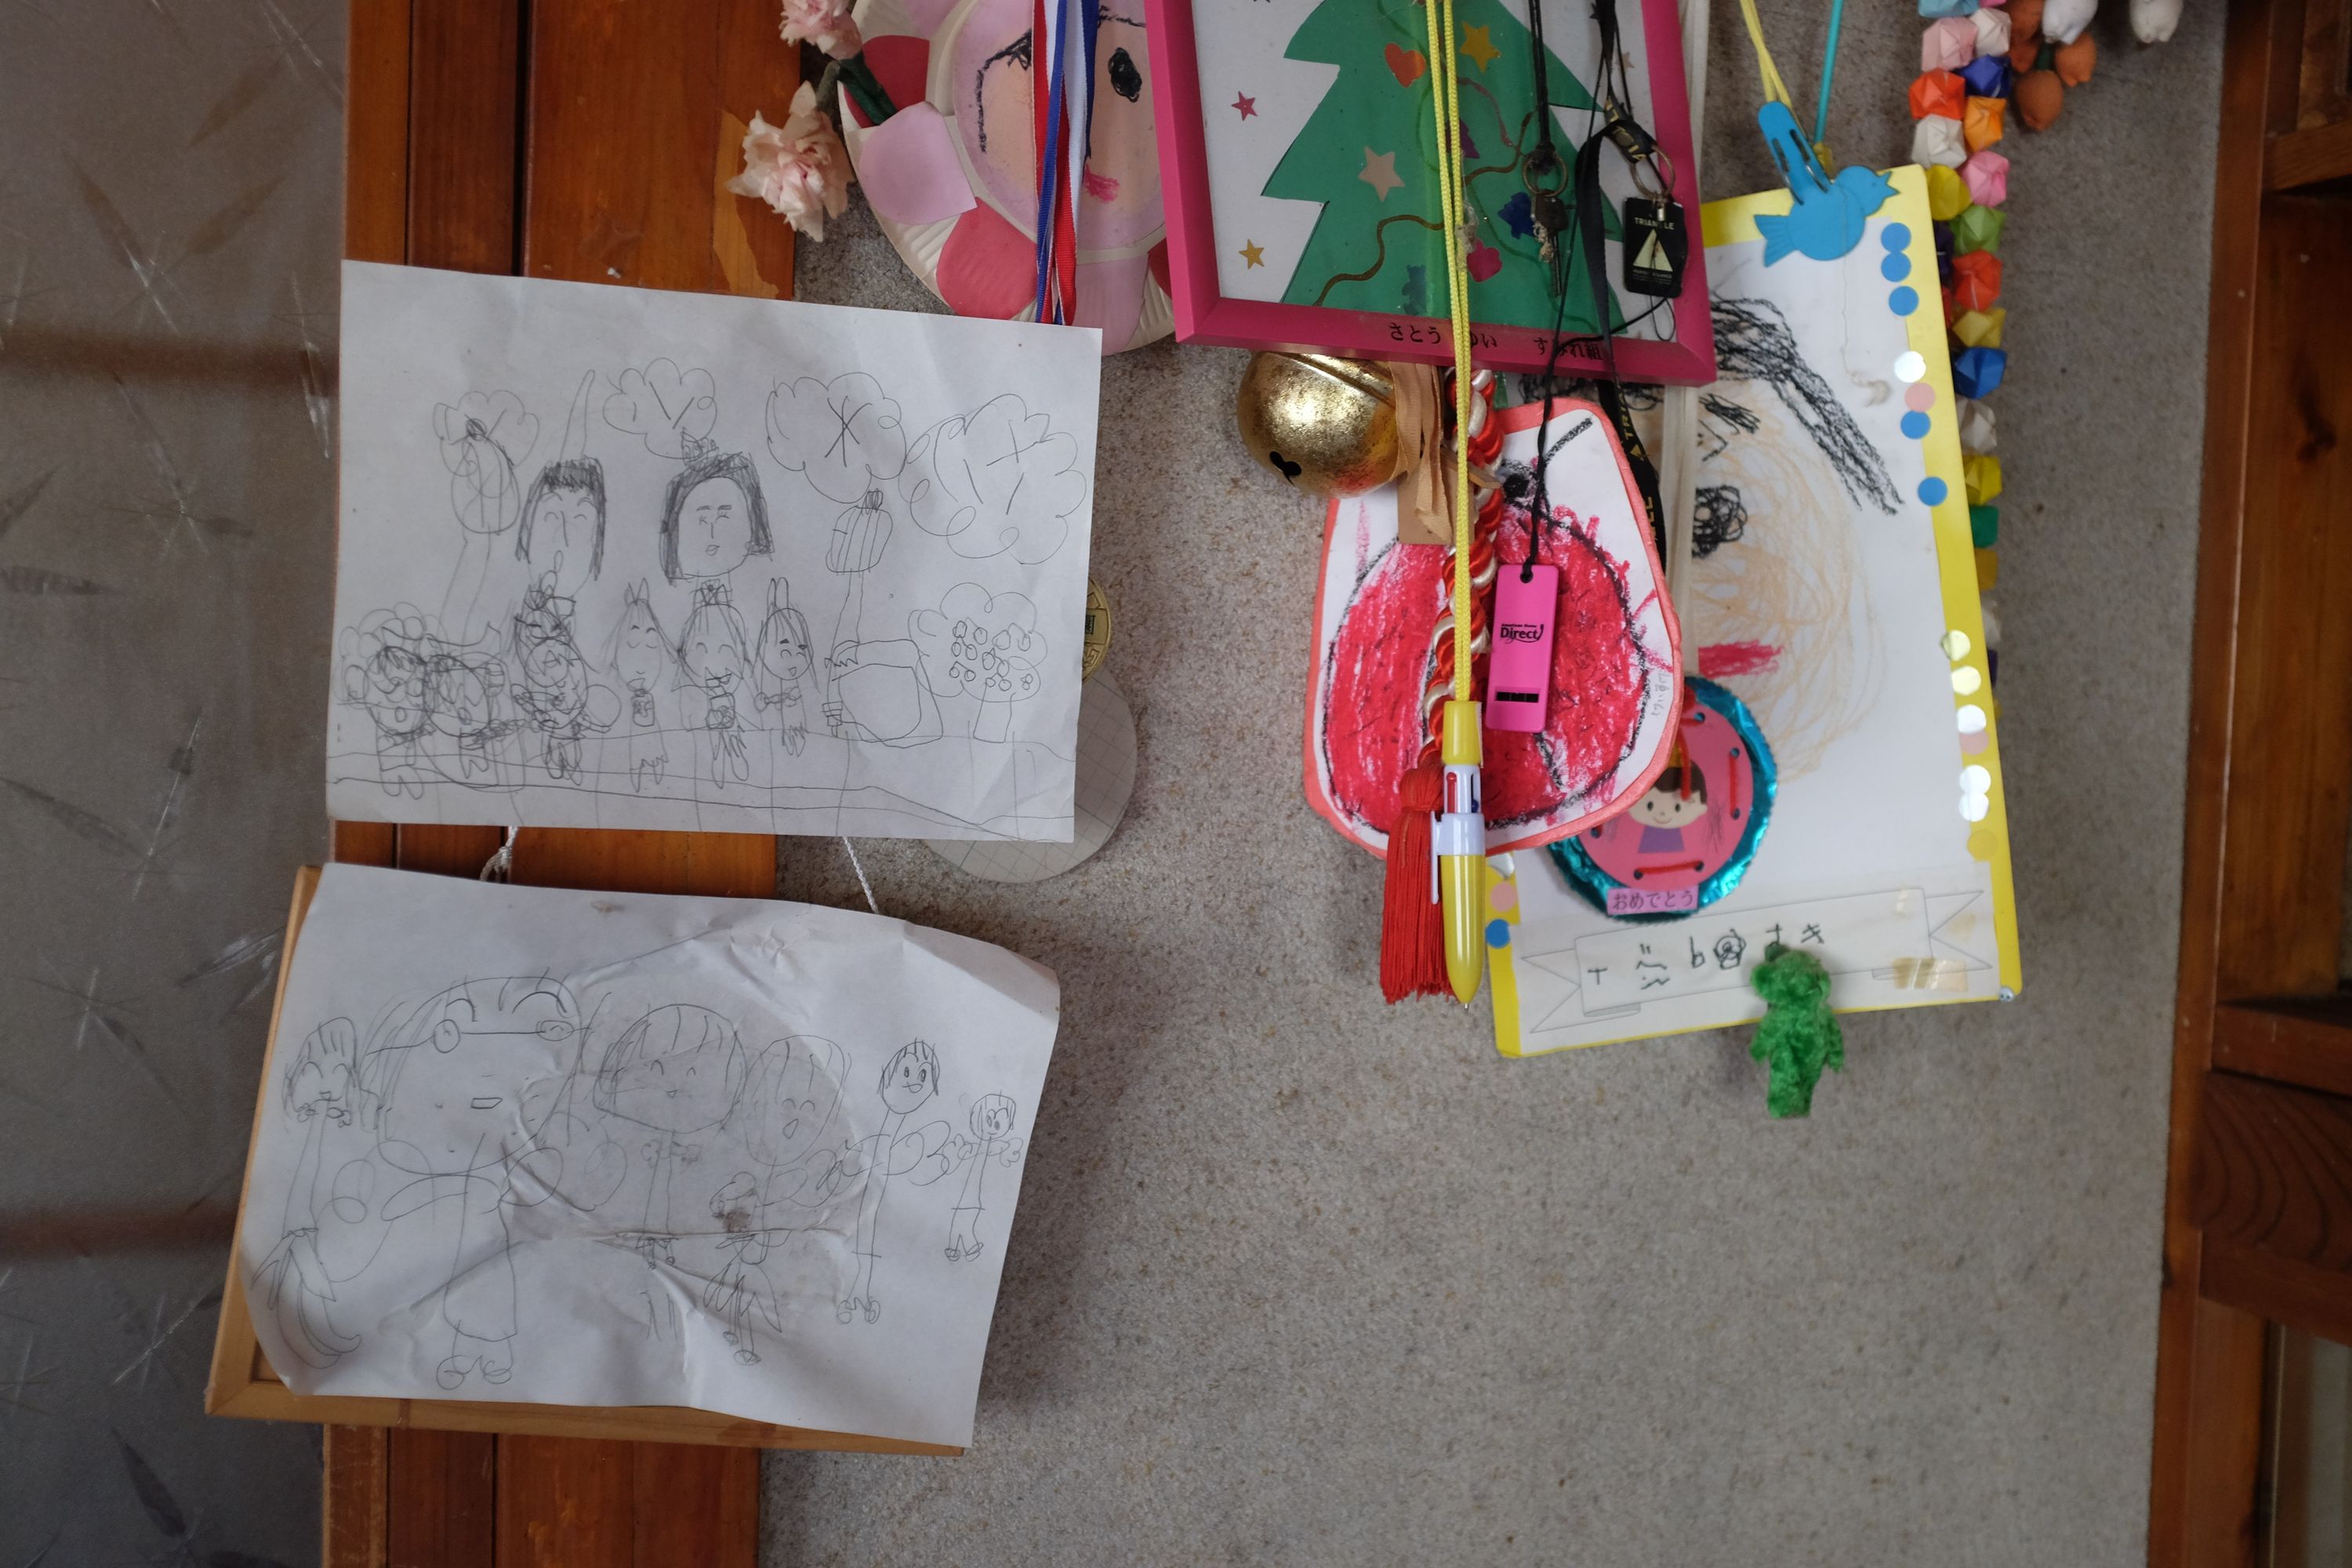 Children’s drawing and various school stuff hanging from a wall.